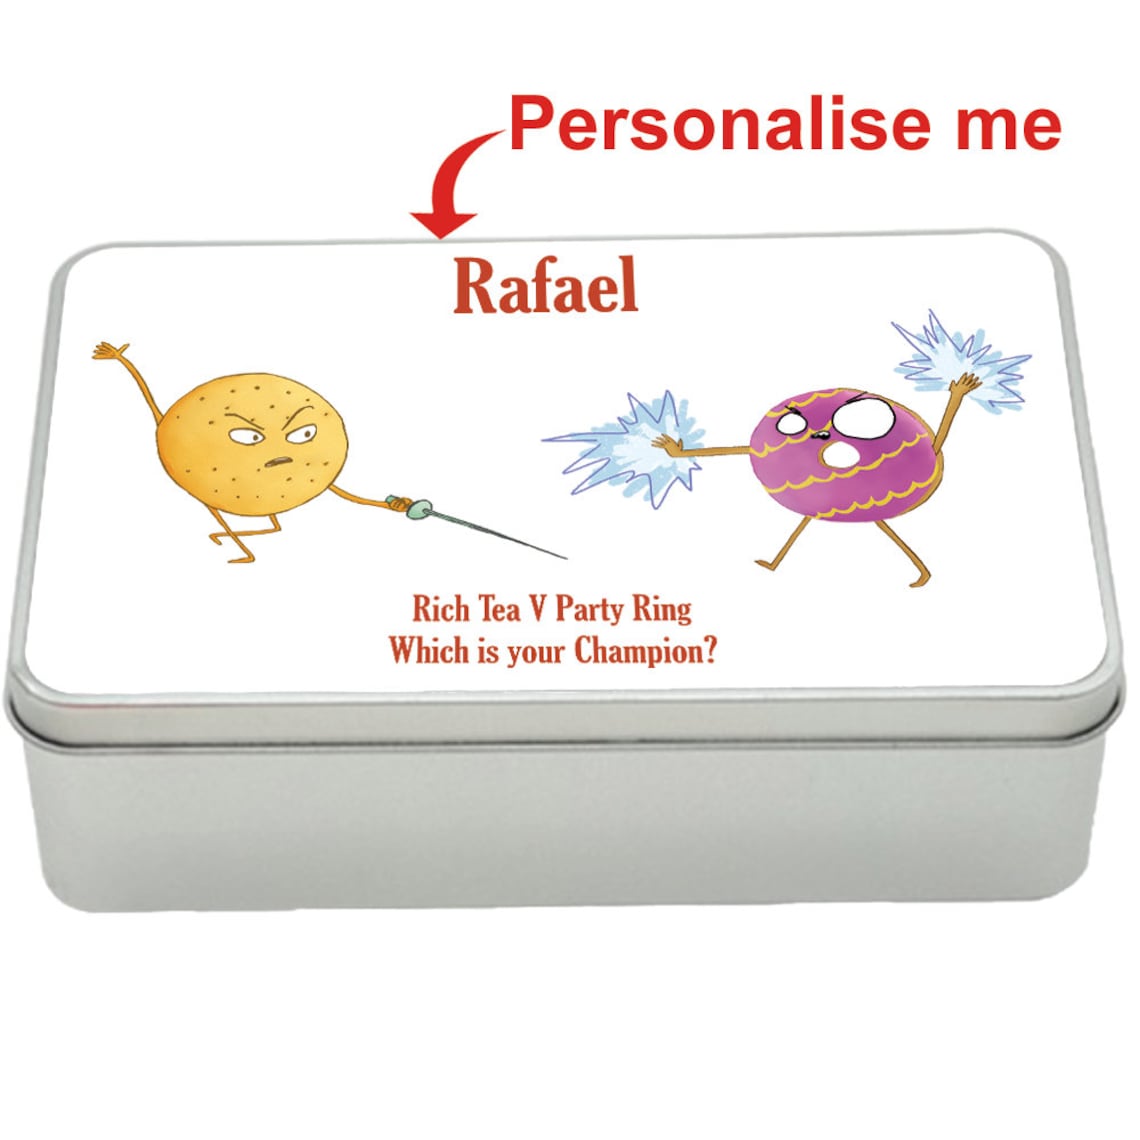 Rich Tea v Party Ring treat tin gift idea, personalised storage tin biscuits